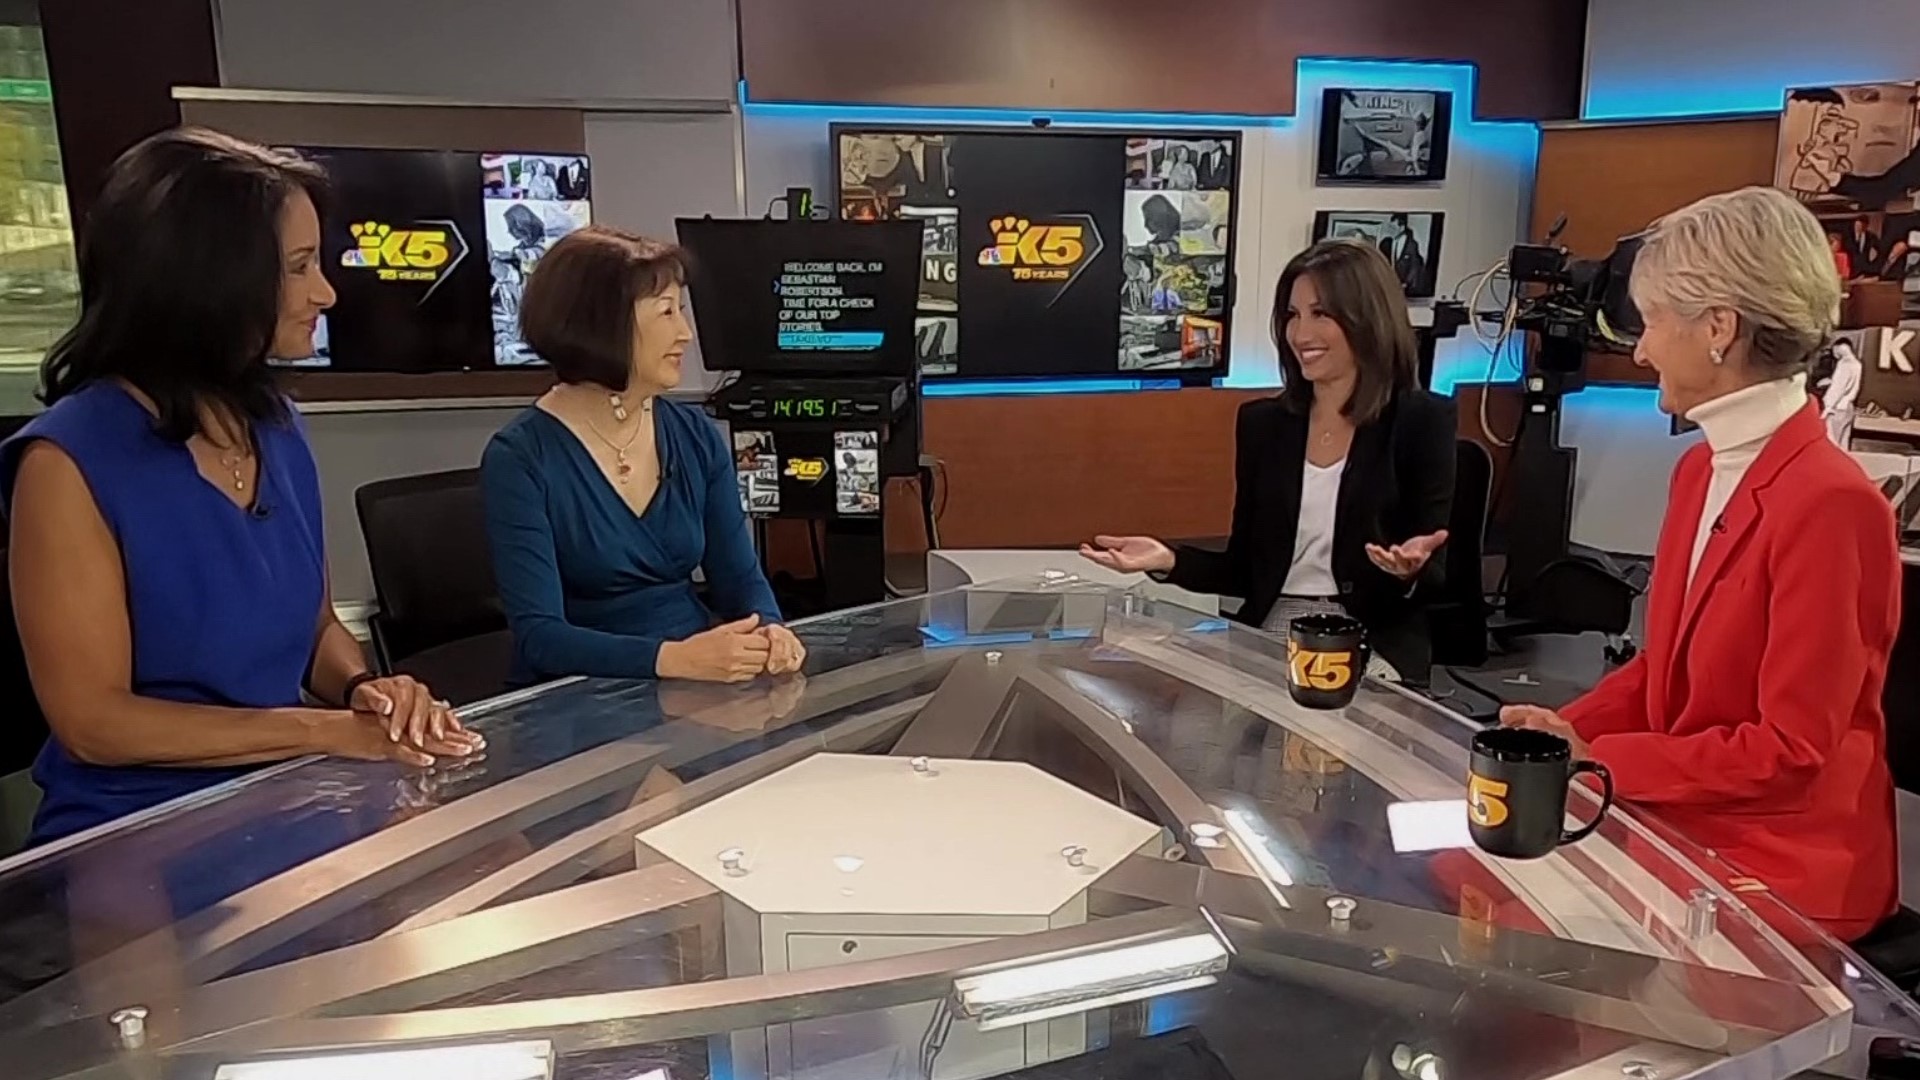 Jessica Janner Castro hosted a conversation with the three KING 5 legends, talking about their careers, achievements and memories as groundbreaking anchors.